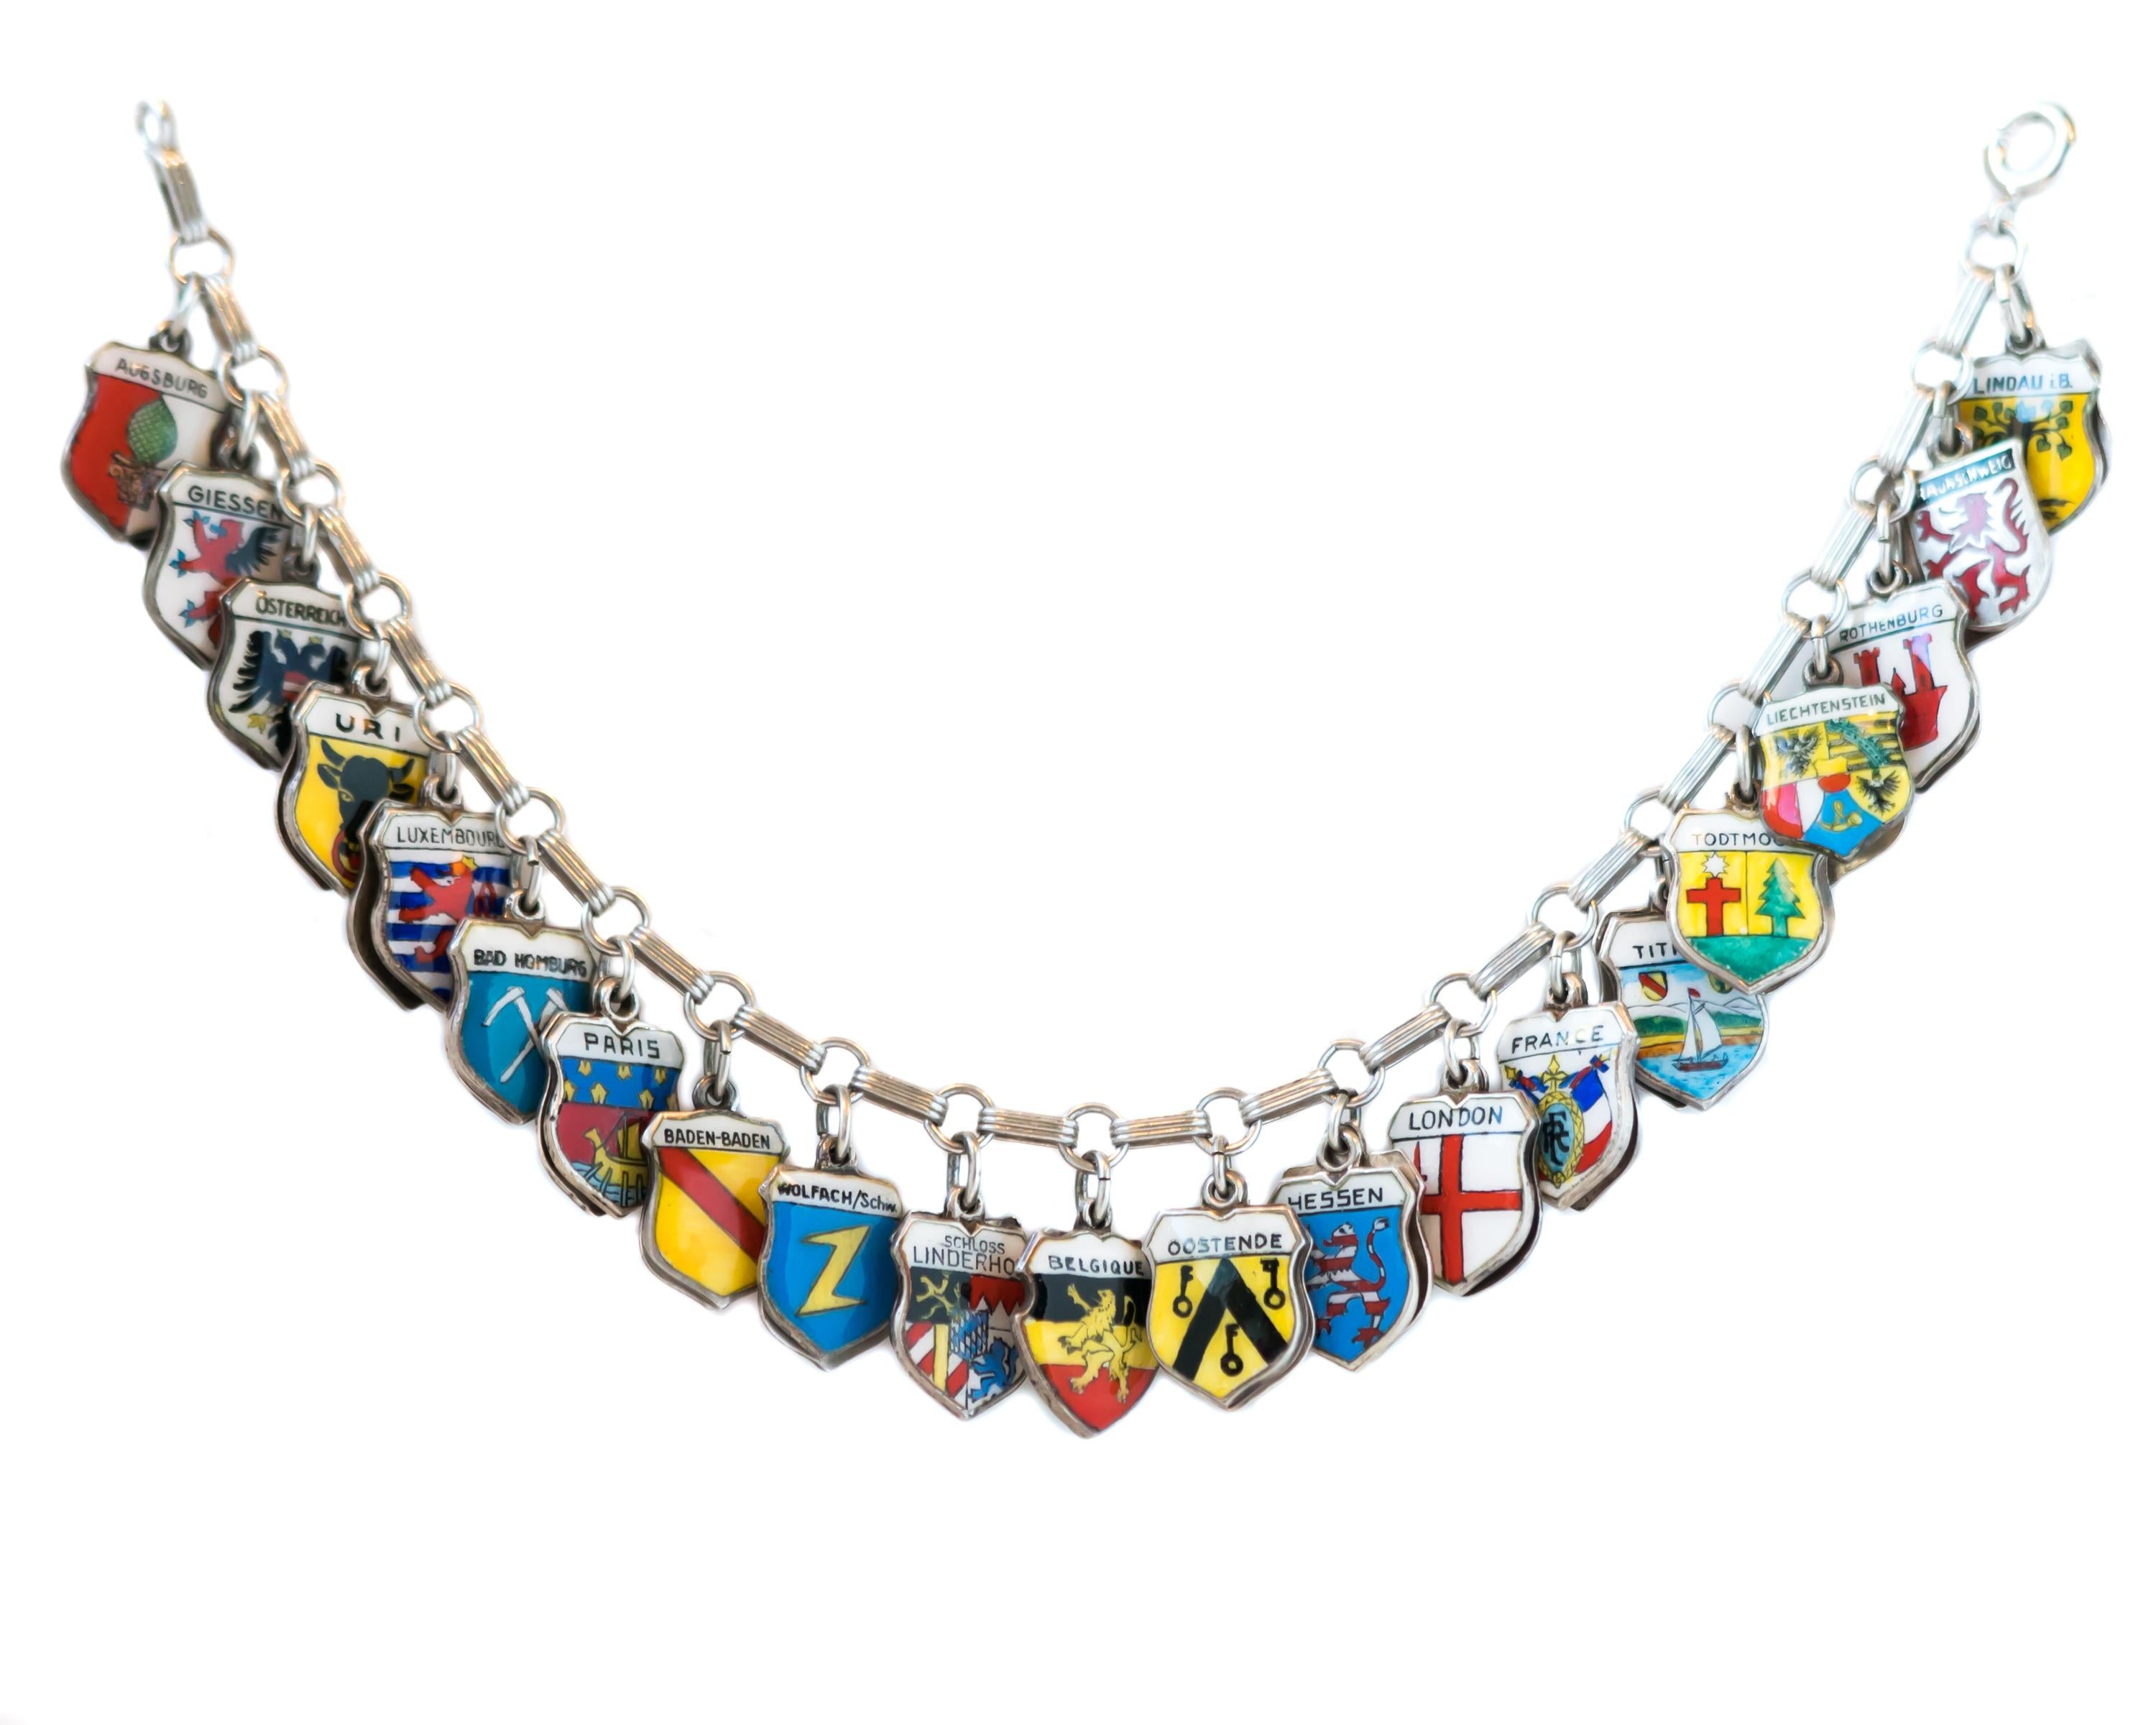 1940s Retro German, European Travel Shield Charm Bracelet - Sterling Silver and German Silver

Features:
42 Charms
Countries including Germany, Switzerland, Liechtenstein, Luxembourg, France, Belgium, Austria, Russia
Includes many German cities,